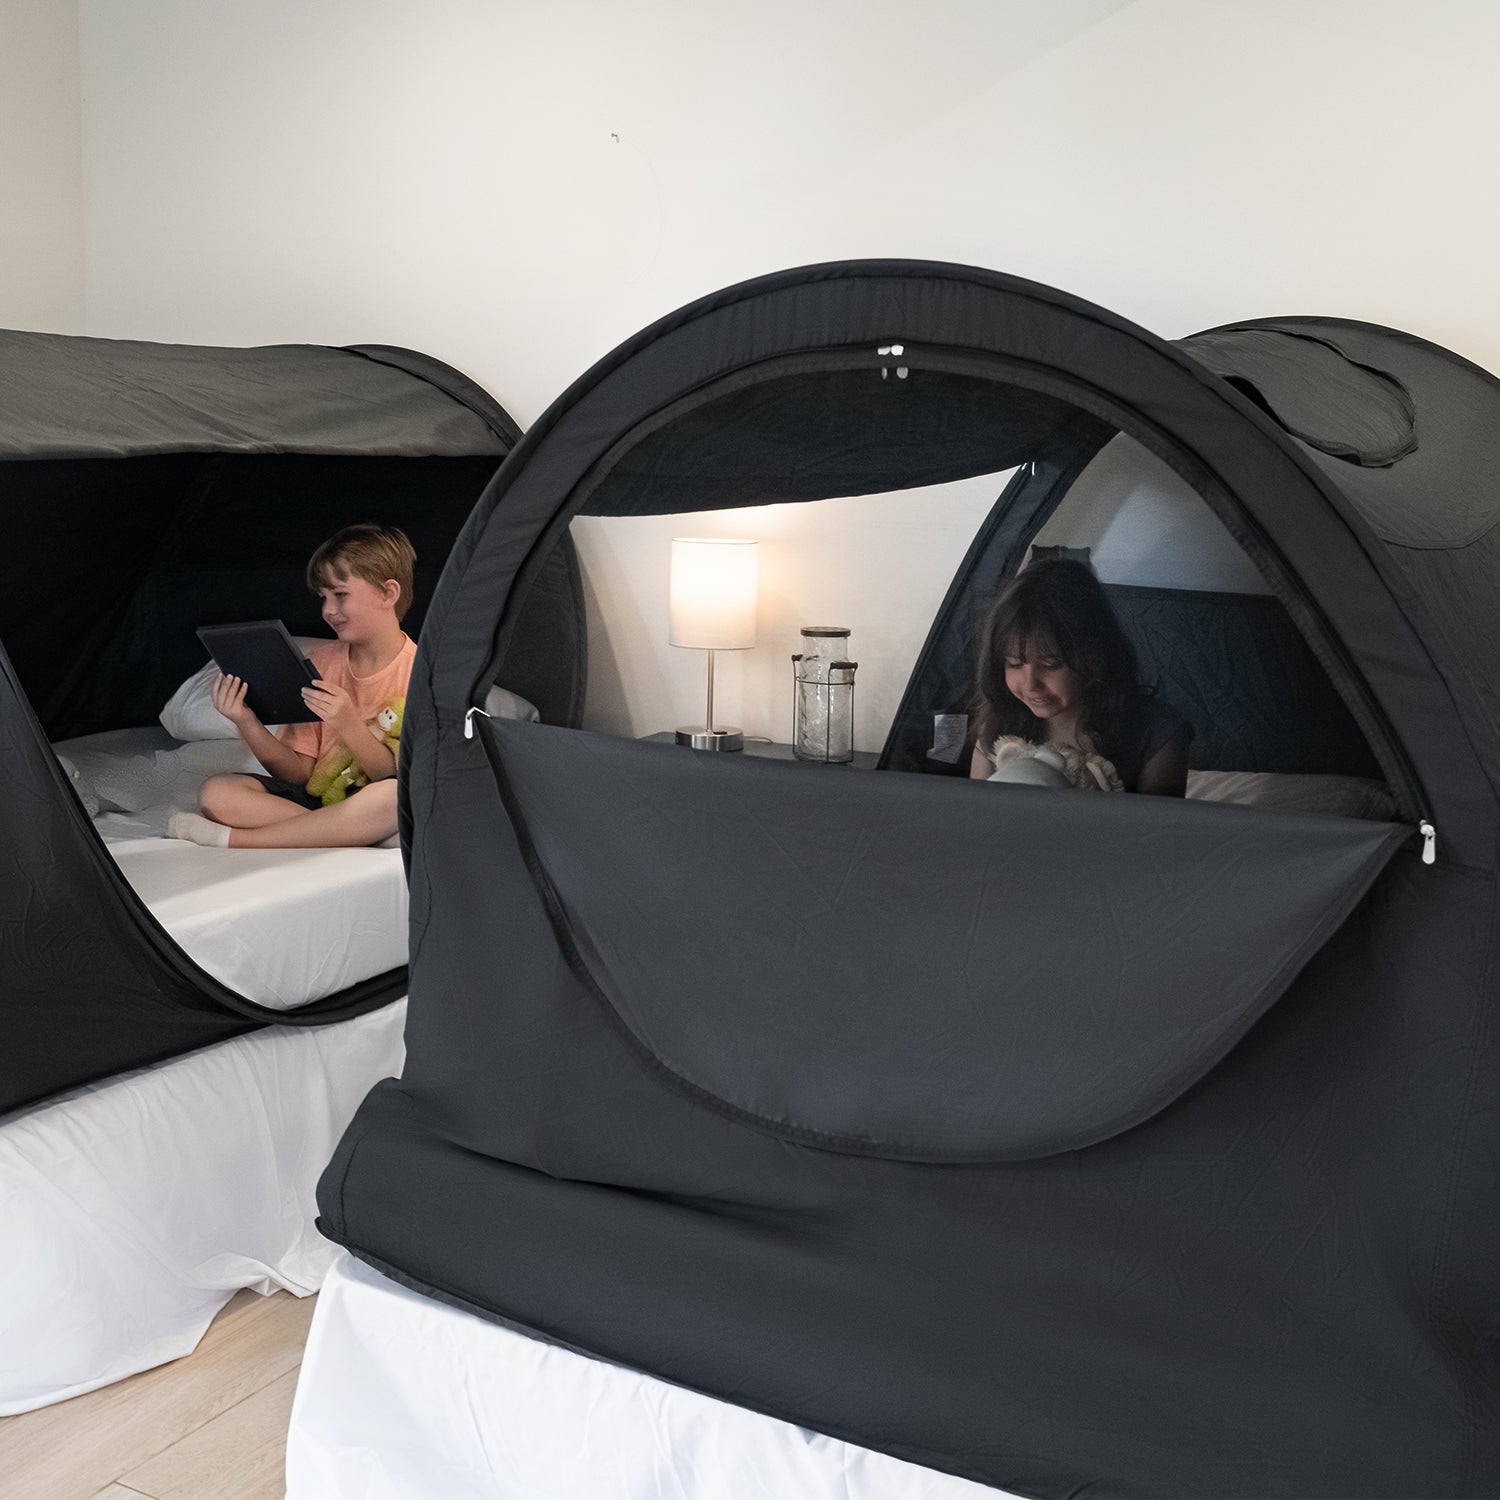 alvantor pop up bed tent provide privacy for kids in shared room